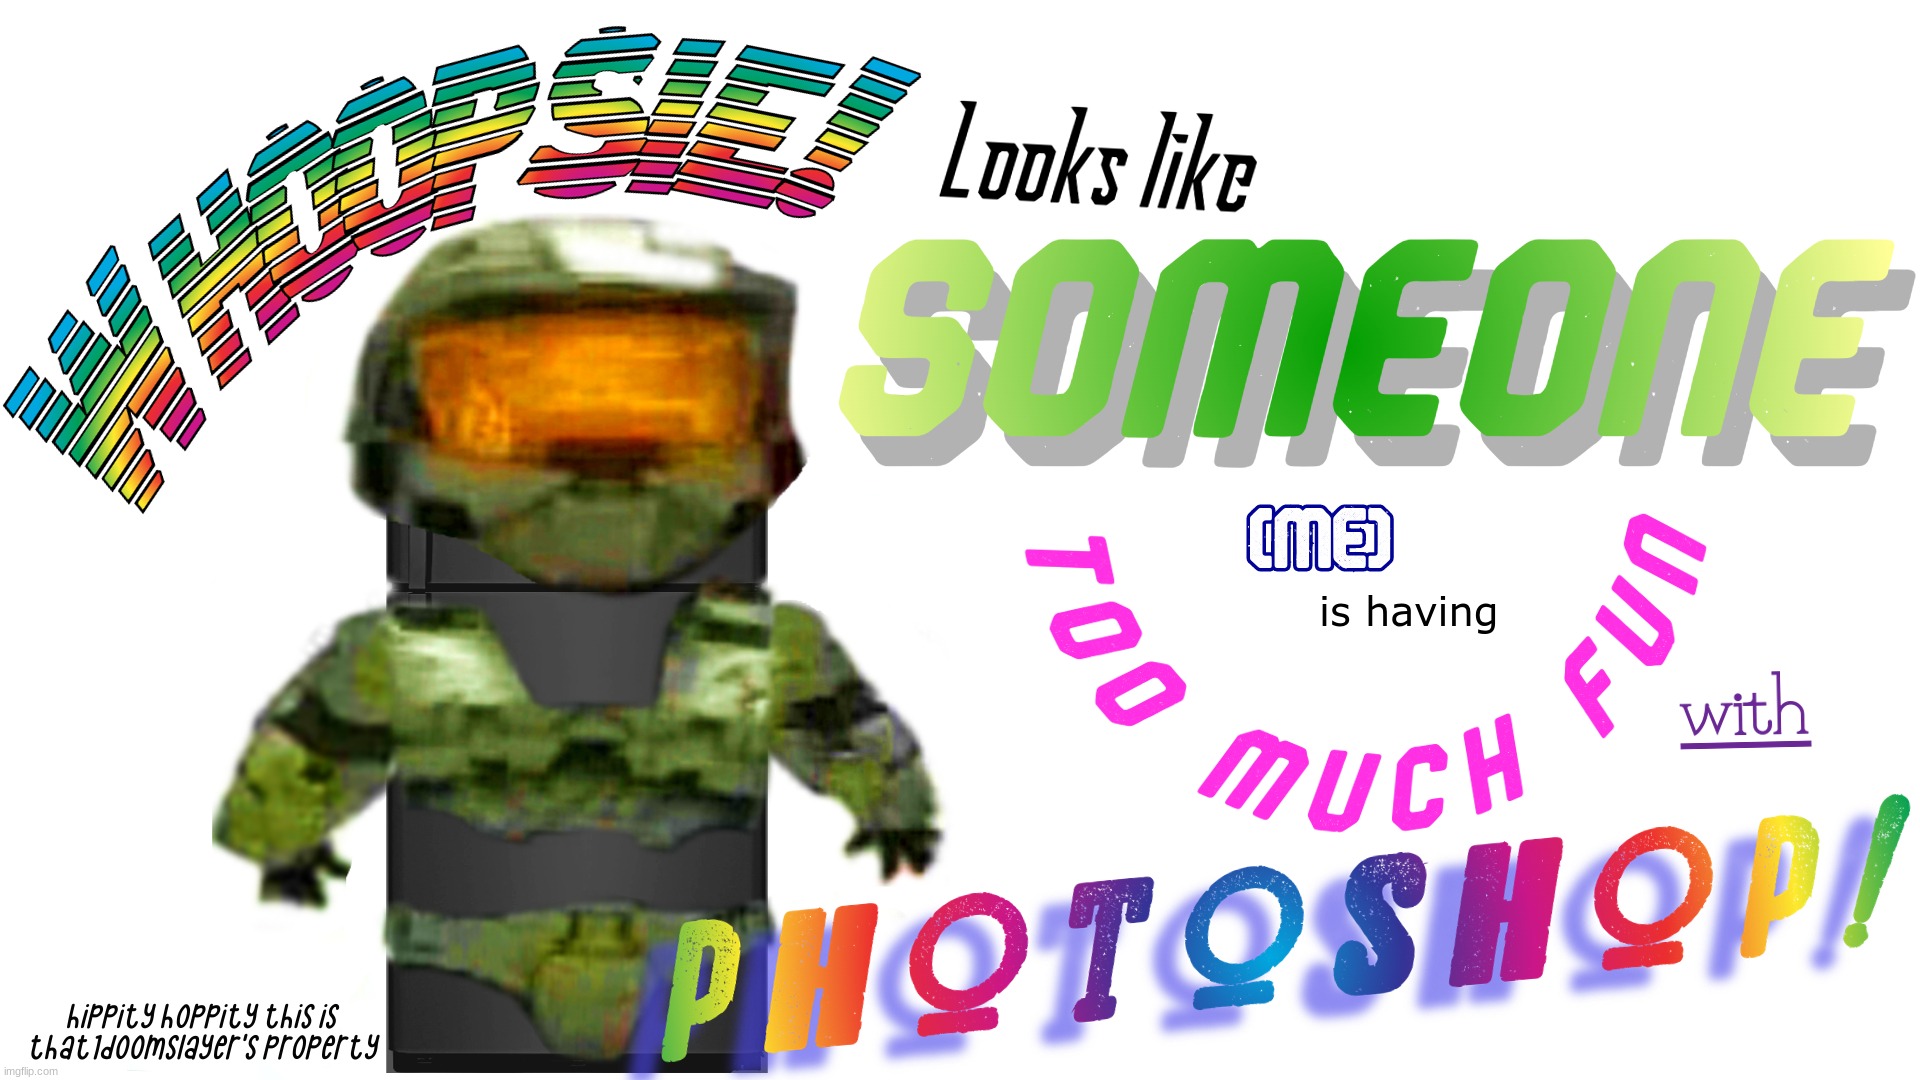 EHEHEHE IM HAVING TOO MUCH FUN WITH PHOTOSHOP | image tagged in photoshop,master chief,fridge,ehehe,mwahahaha,why are you reading the tags | made w/ Imgflip meme maker